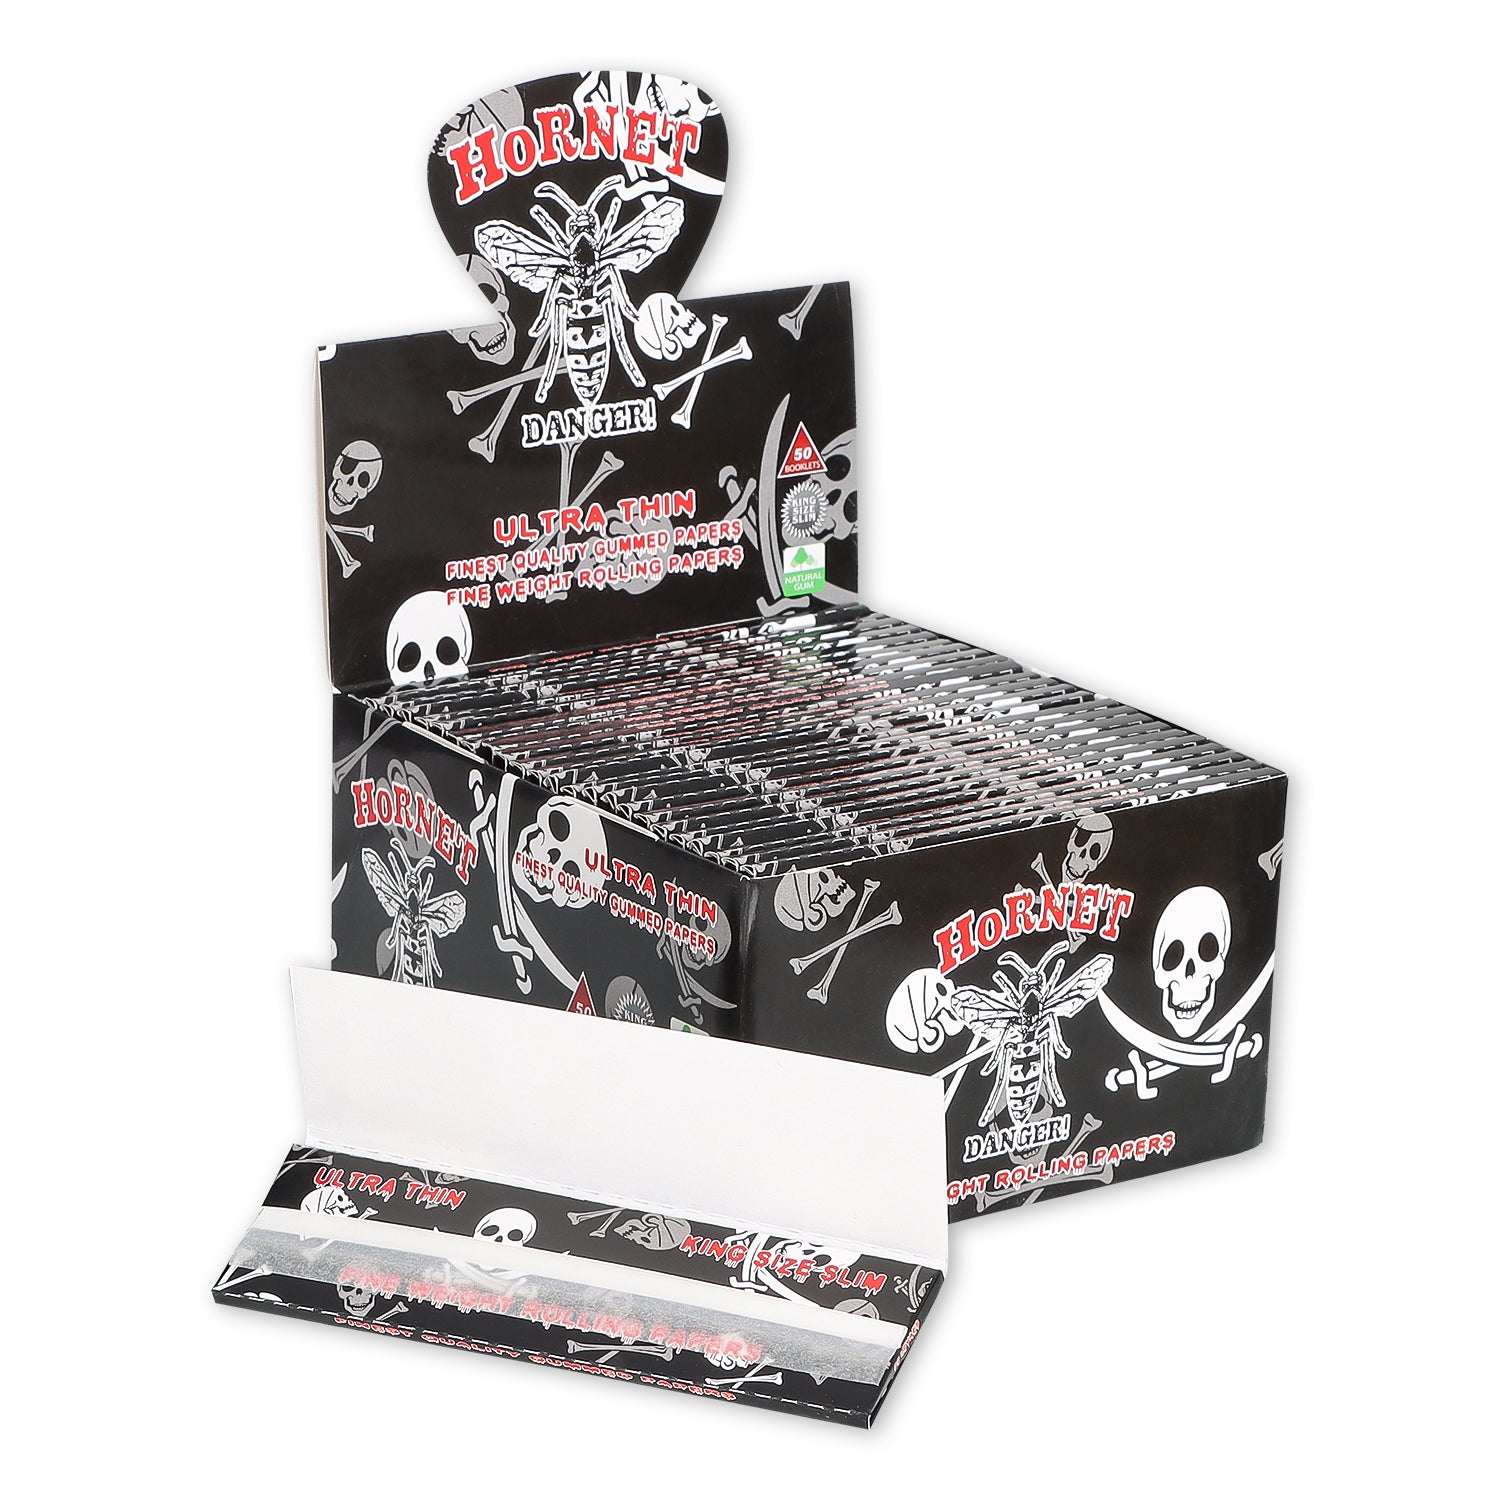 HORNET Skull Painting Rolling Paer, King Size Slim Cigarette Rolling Paper, Slow Buring Rolling Papers, 32 PCS / Pack 50 Packs / Box